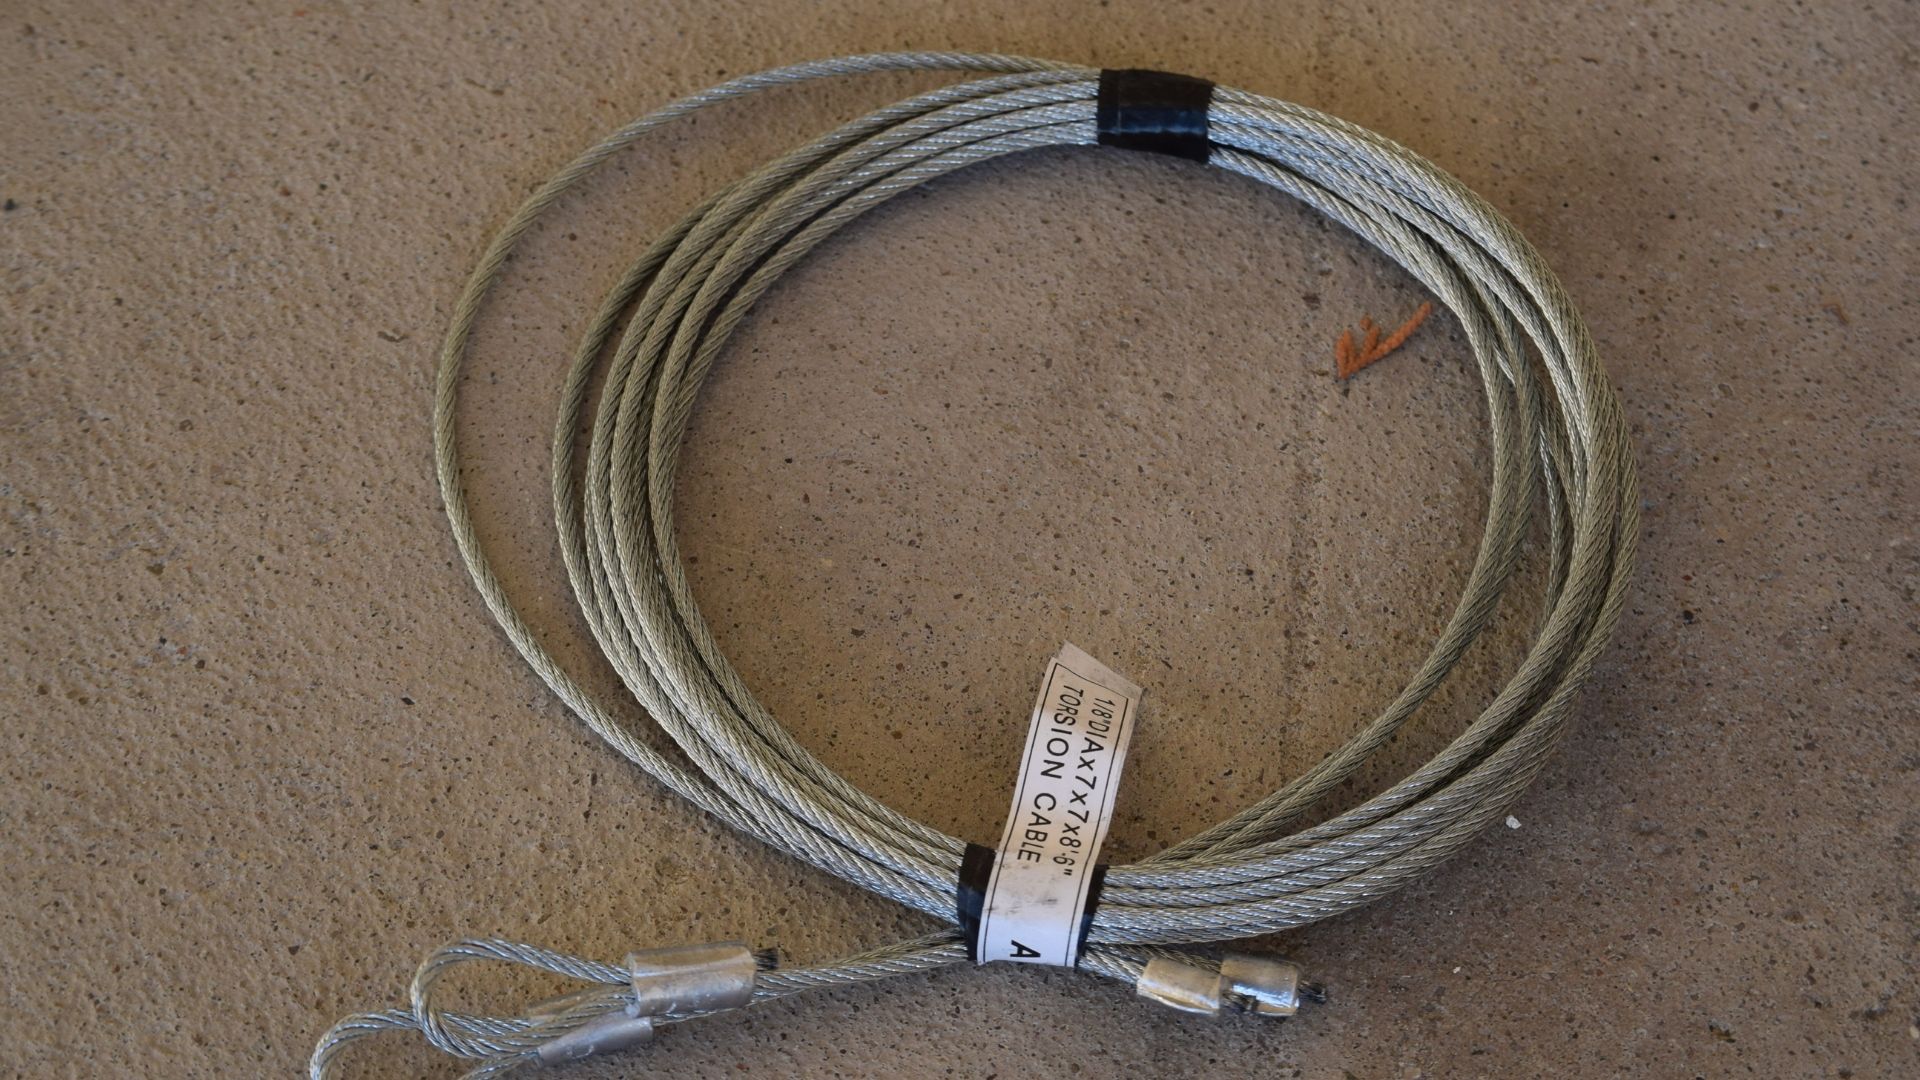 Residential Cables - What Are Garage Door Cables